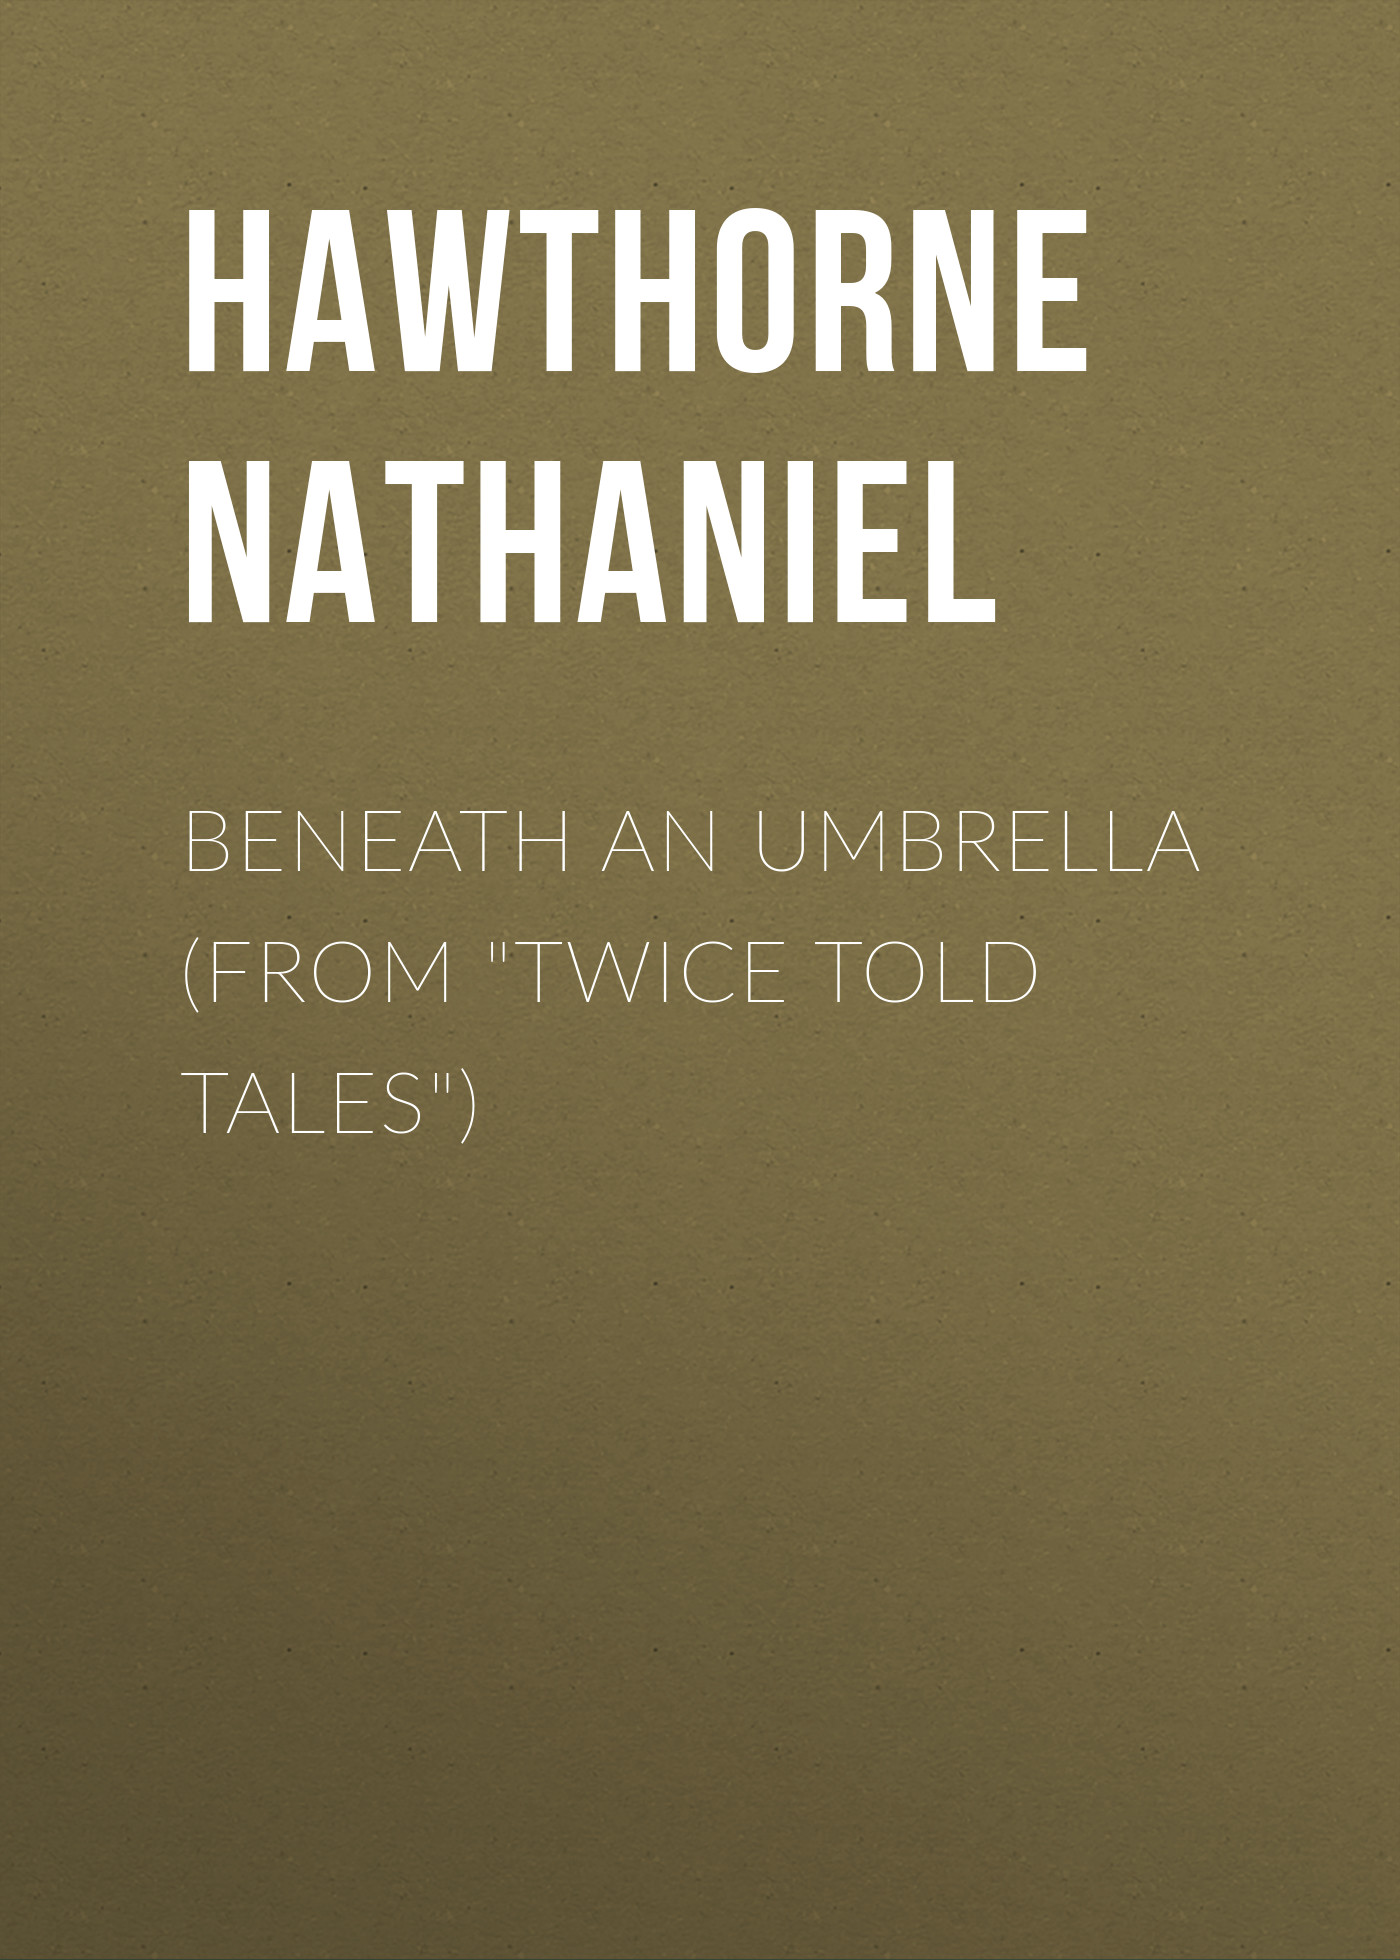 Beneath an Umbrella (From"Twice Told Tales")